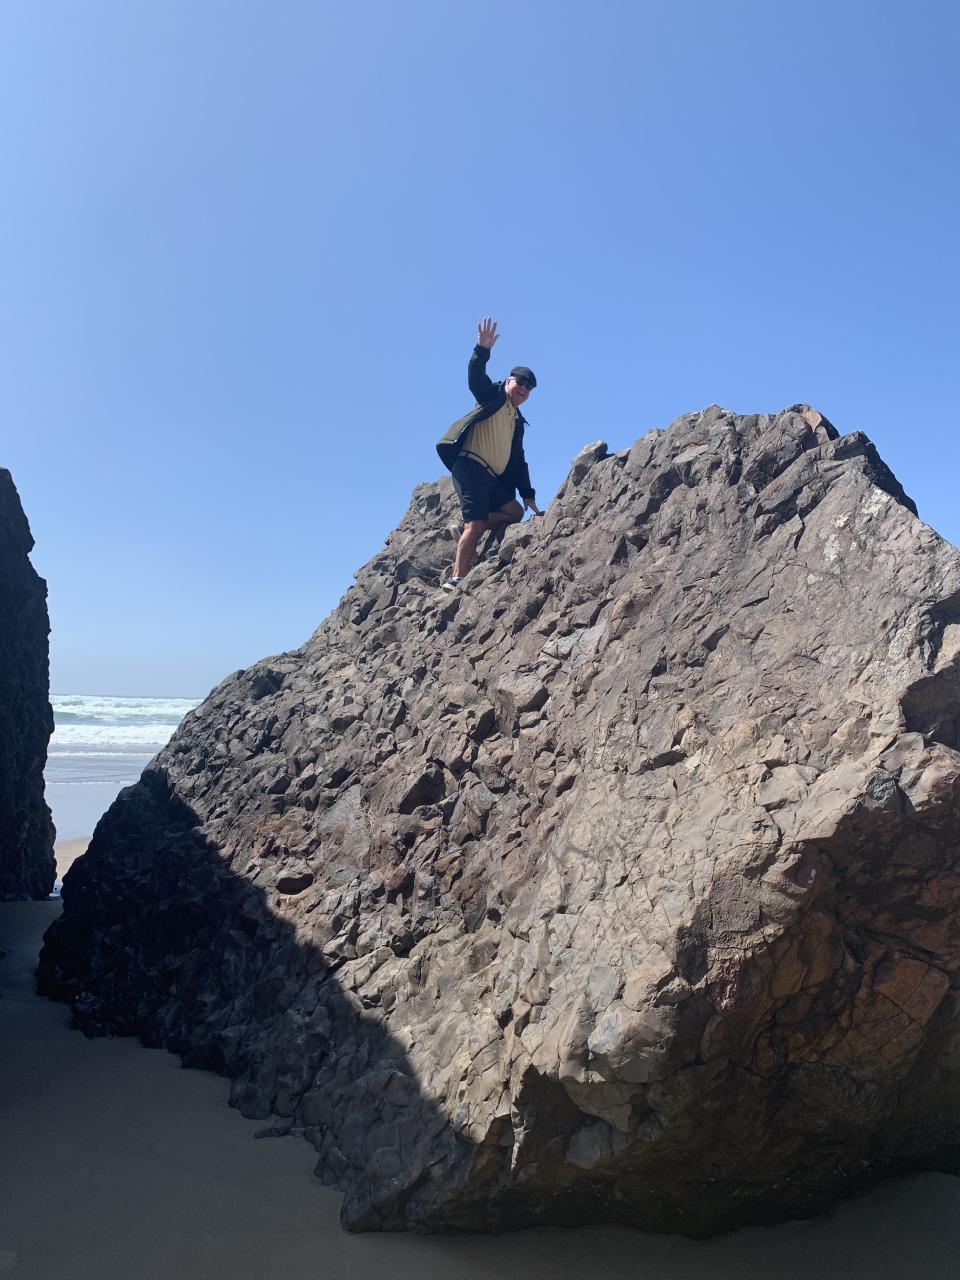 Candace's husband, Bruce, is being a kid again climbing the boulders at Arch Cape Beach off Highway 101 on the coast of Oregon.